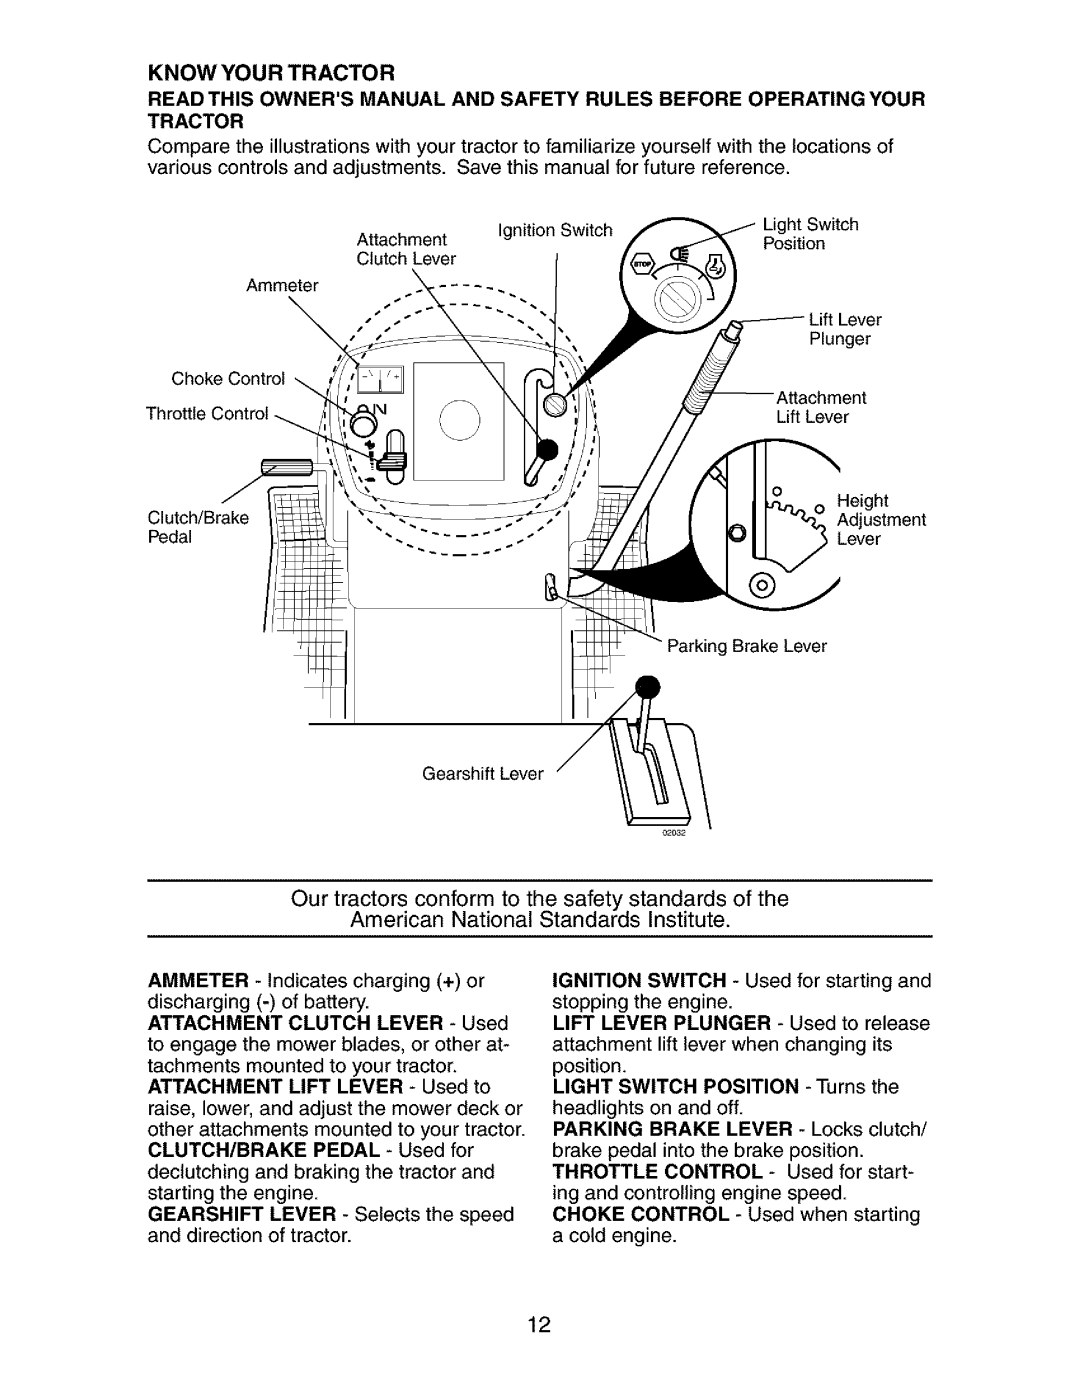 Craftsman 917.27377 manual American National Standards Institute, Know Your Tractor, ATTACHMENT CLUTCH LEVER - Used 